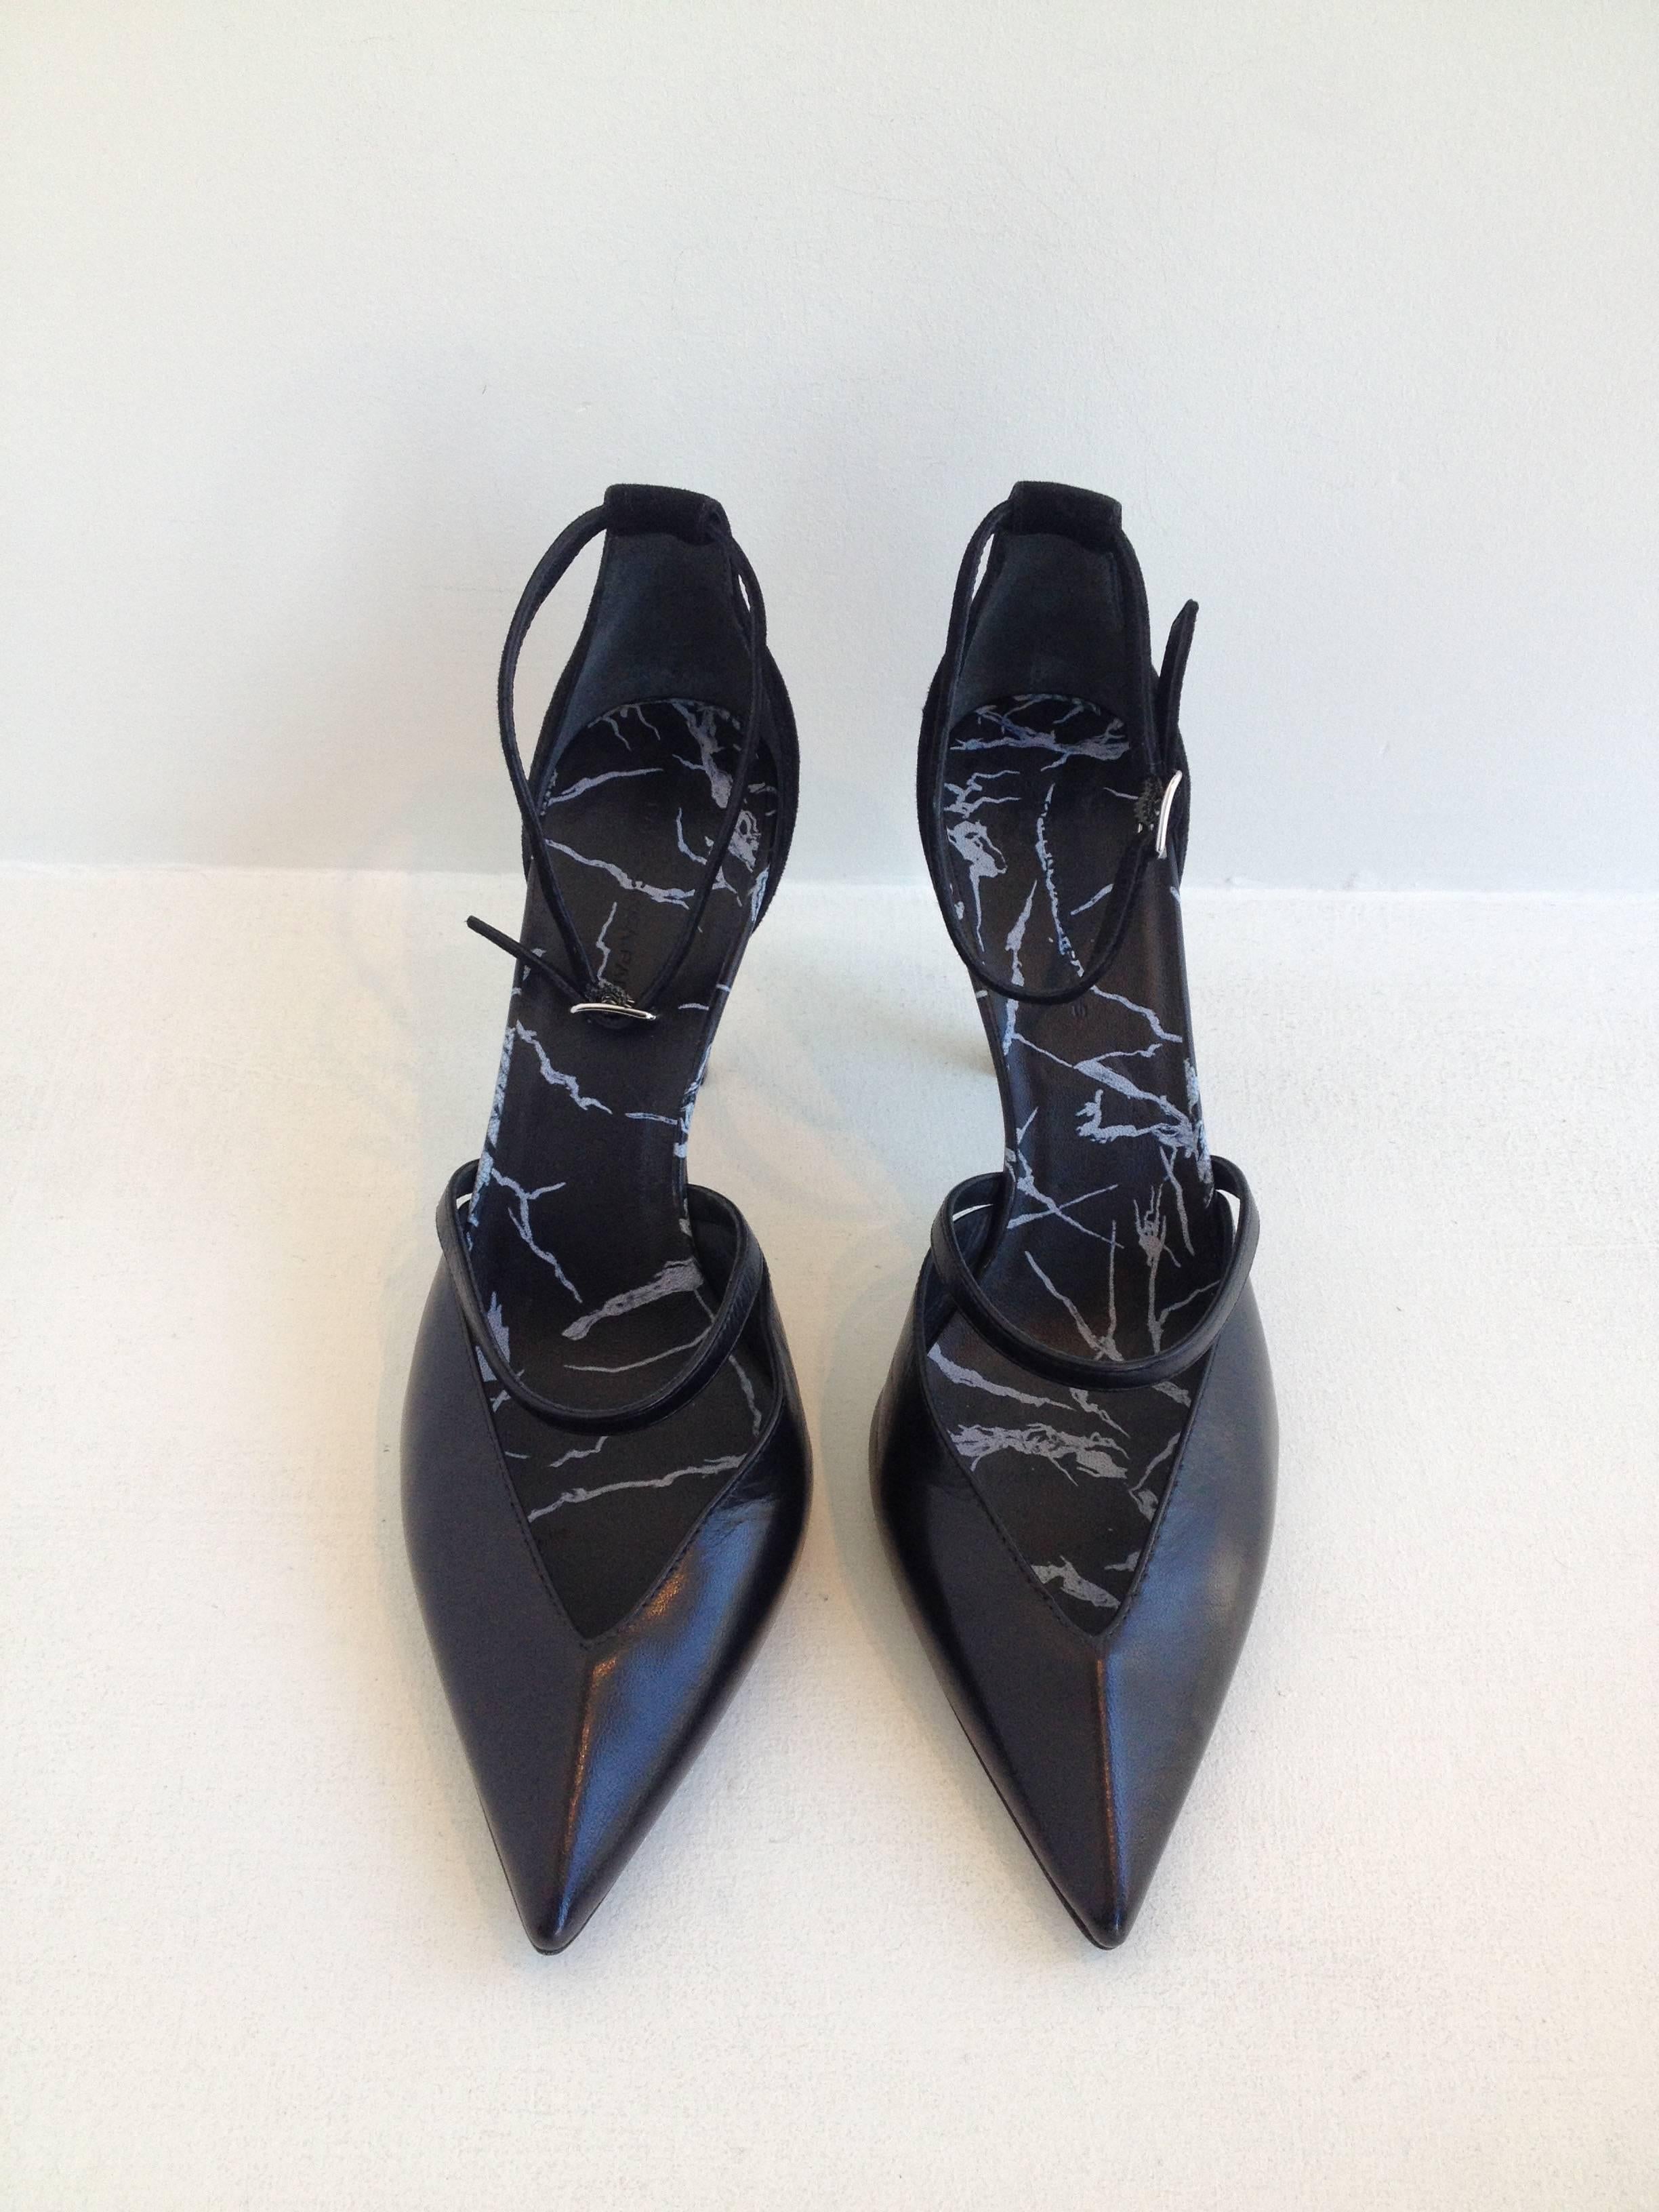 Sleek, edgy, and ultra-modern, these heels are absolutely perfect. The pointed toe and the strap that wraps around the foot just above the toe are made of gorgeous black leather, while the 3.5 inch heel and ankle strap are cut from super soft black